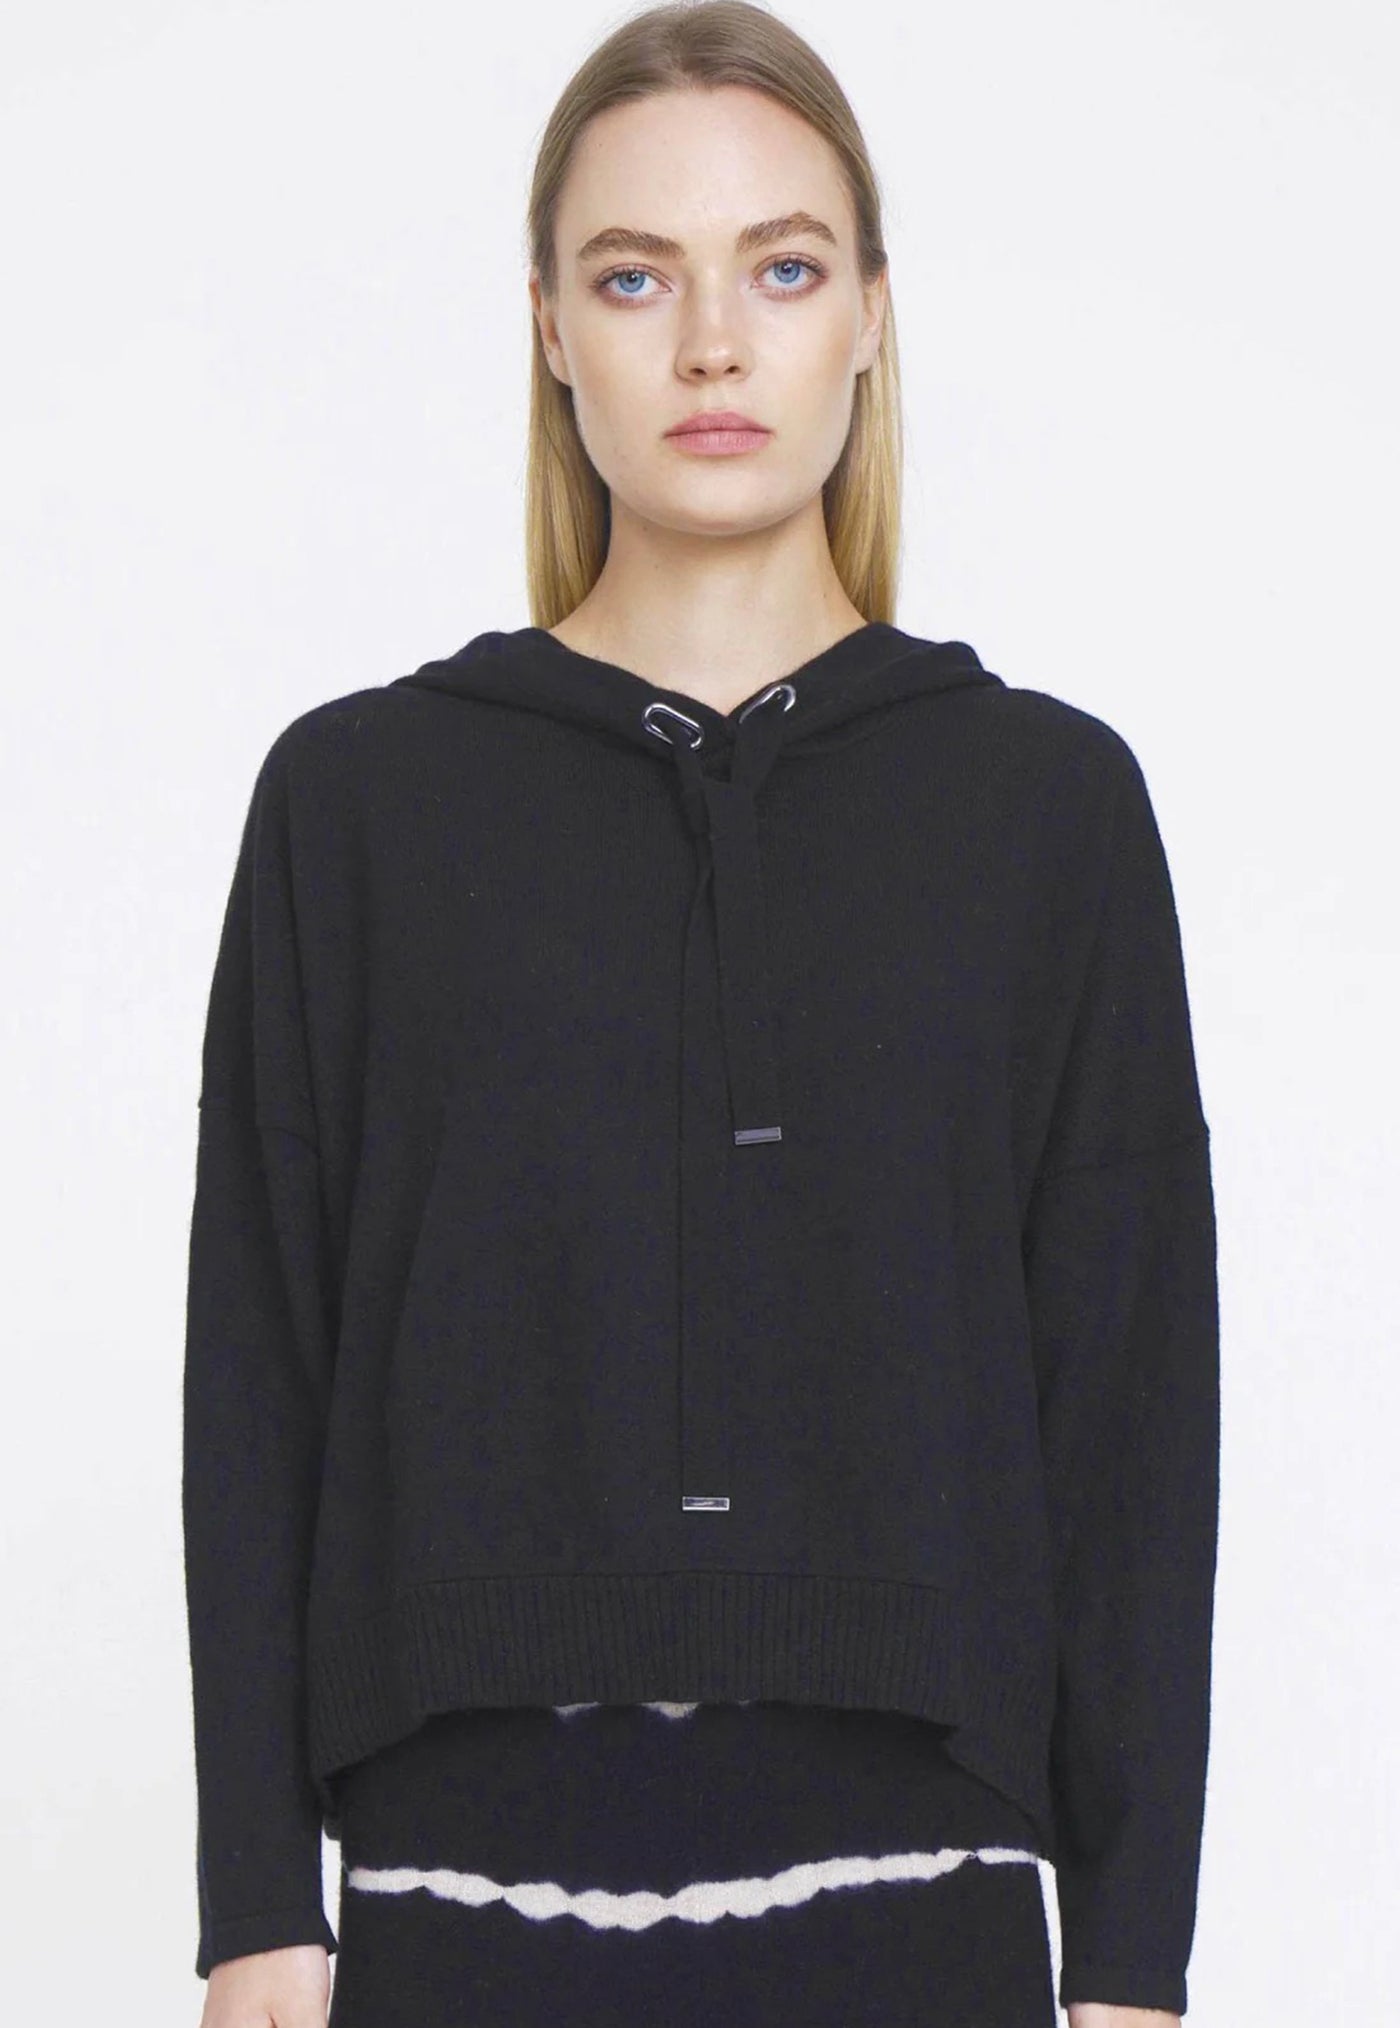 N.37 100% Cashmere Oversized Hoody - Black sold by Angel Divine